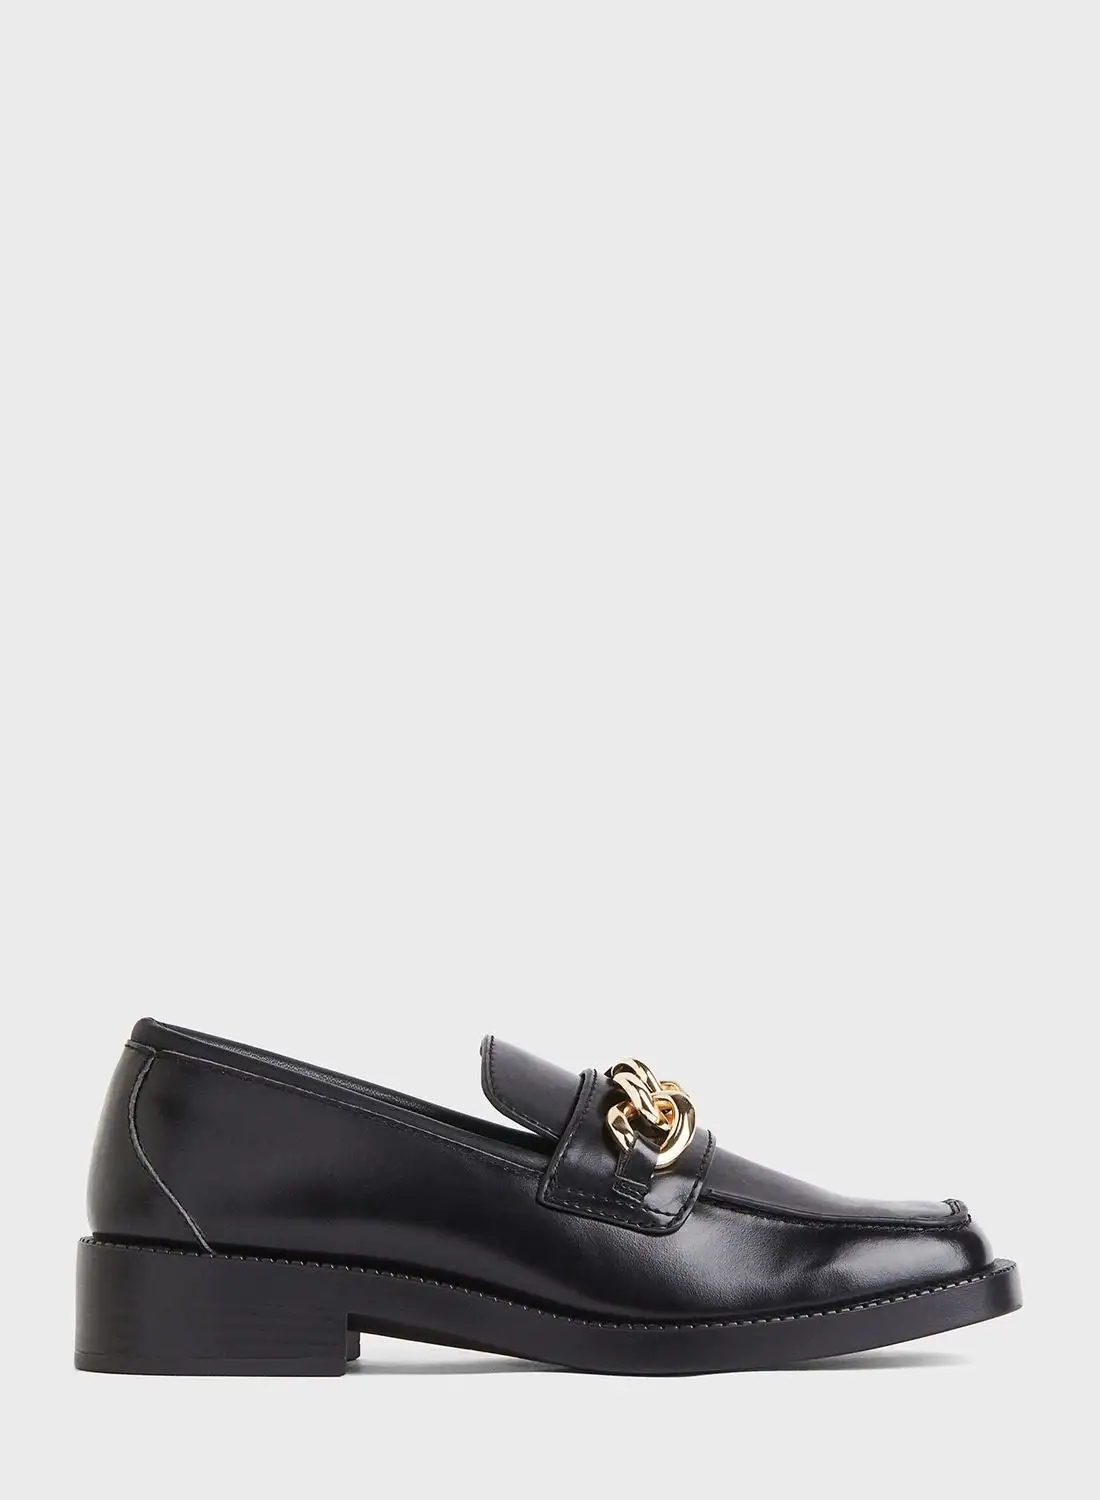 H&M Wide Toe Loafers